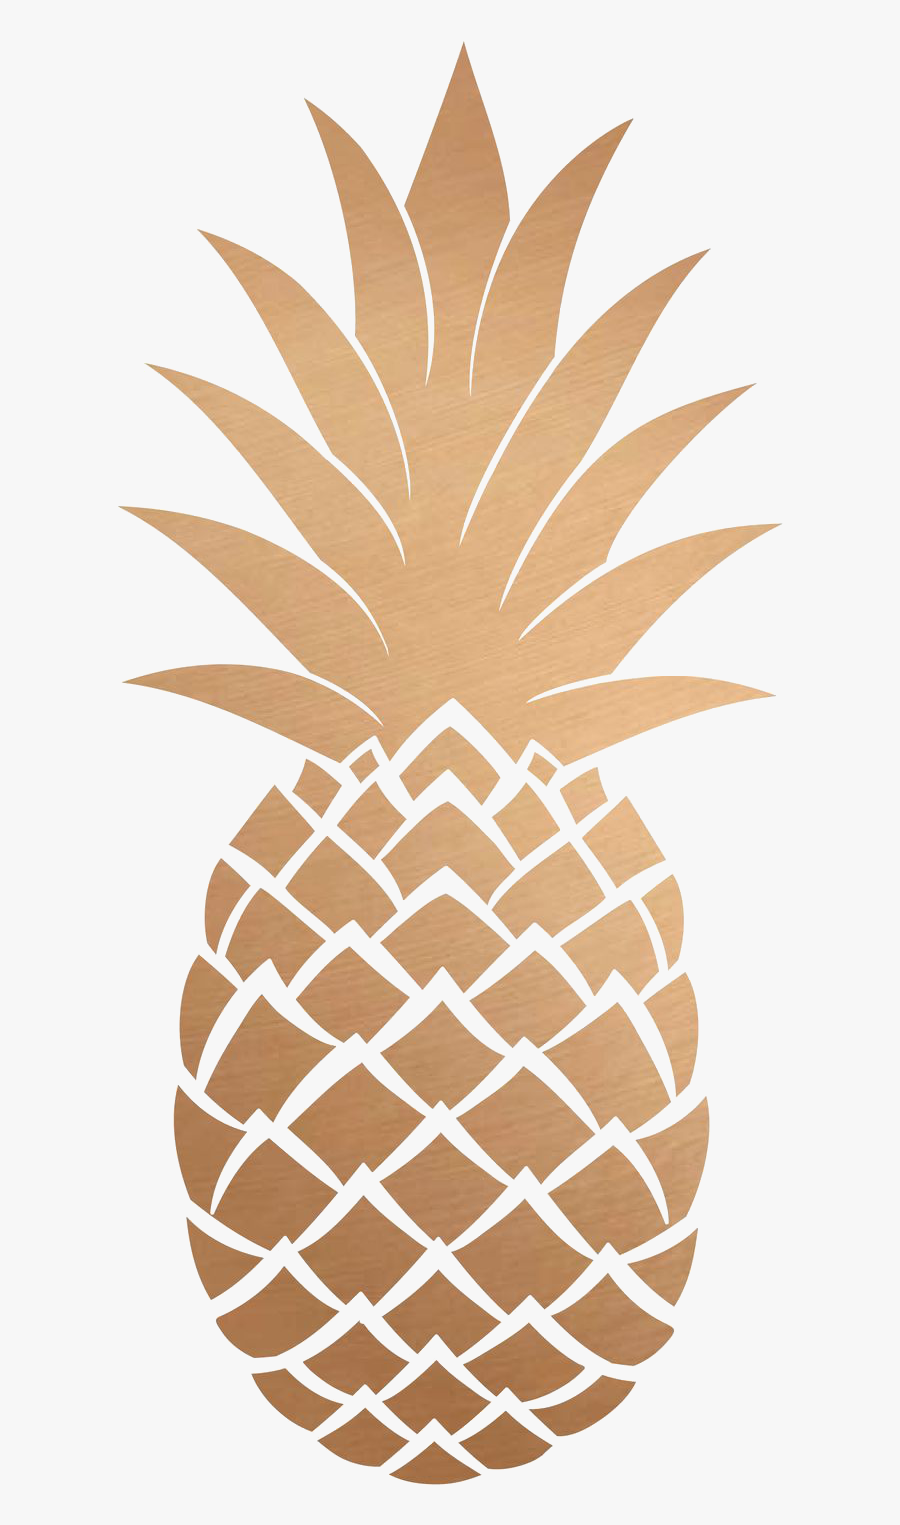 Pia Png Tumblr Gold Pineapple Transparent Background- - Gold Pineapple Transparent Background, Transparent Clipart